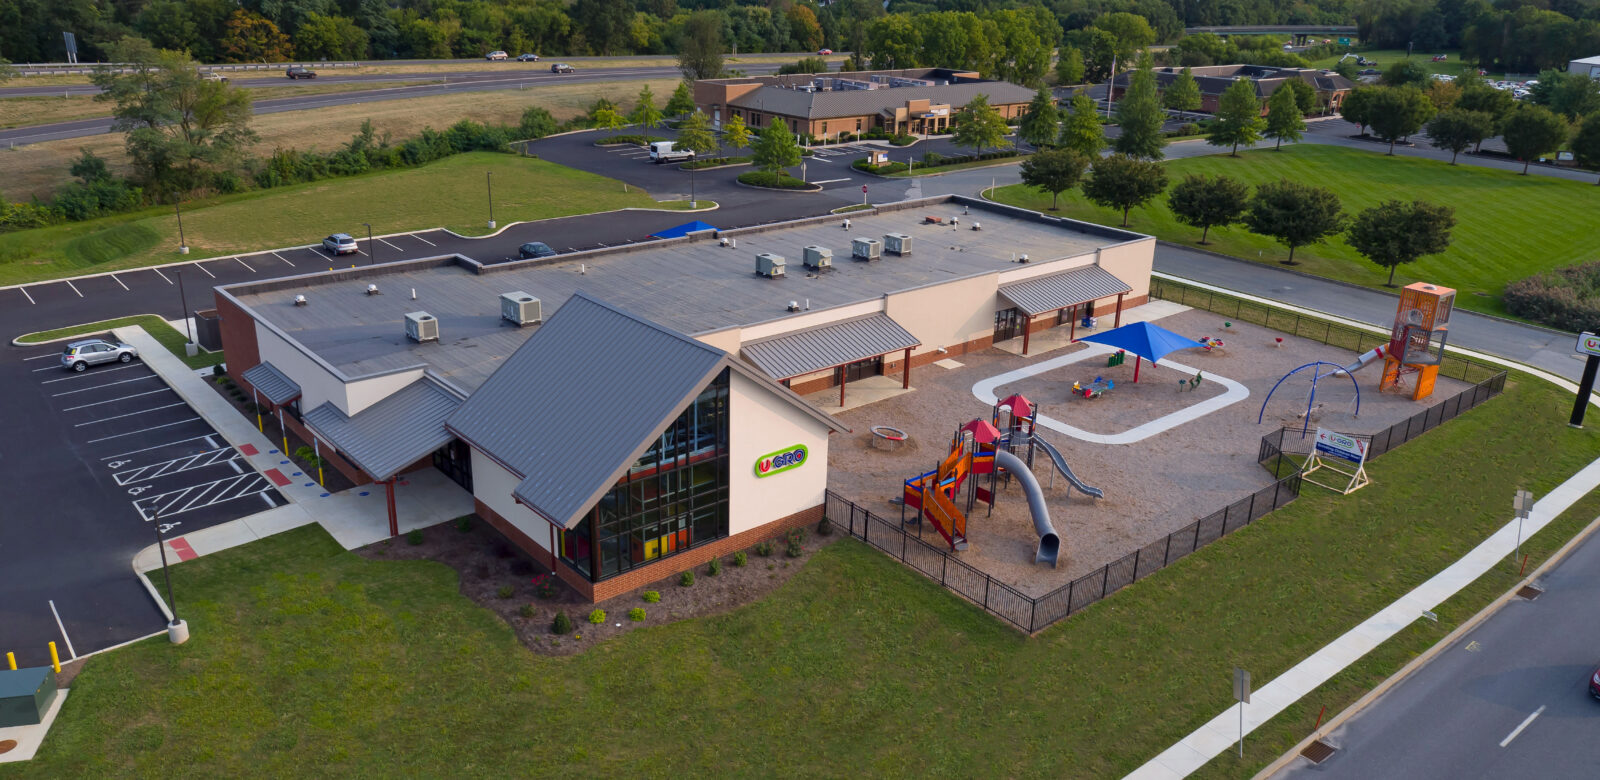 Exterior and aerial shot of a U-Gro education building with playground